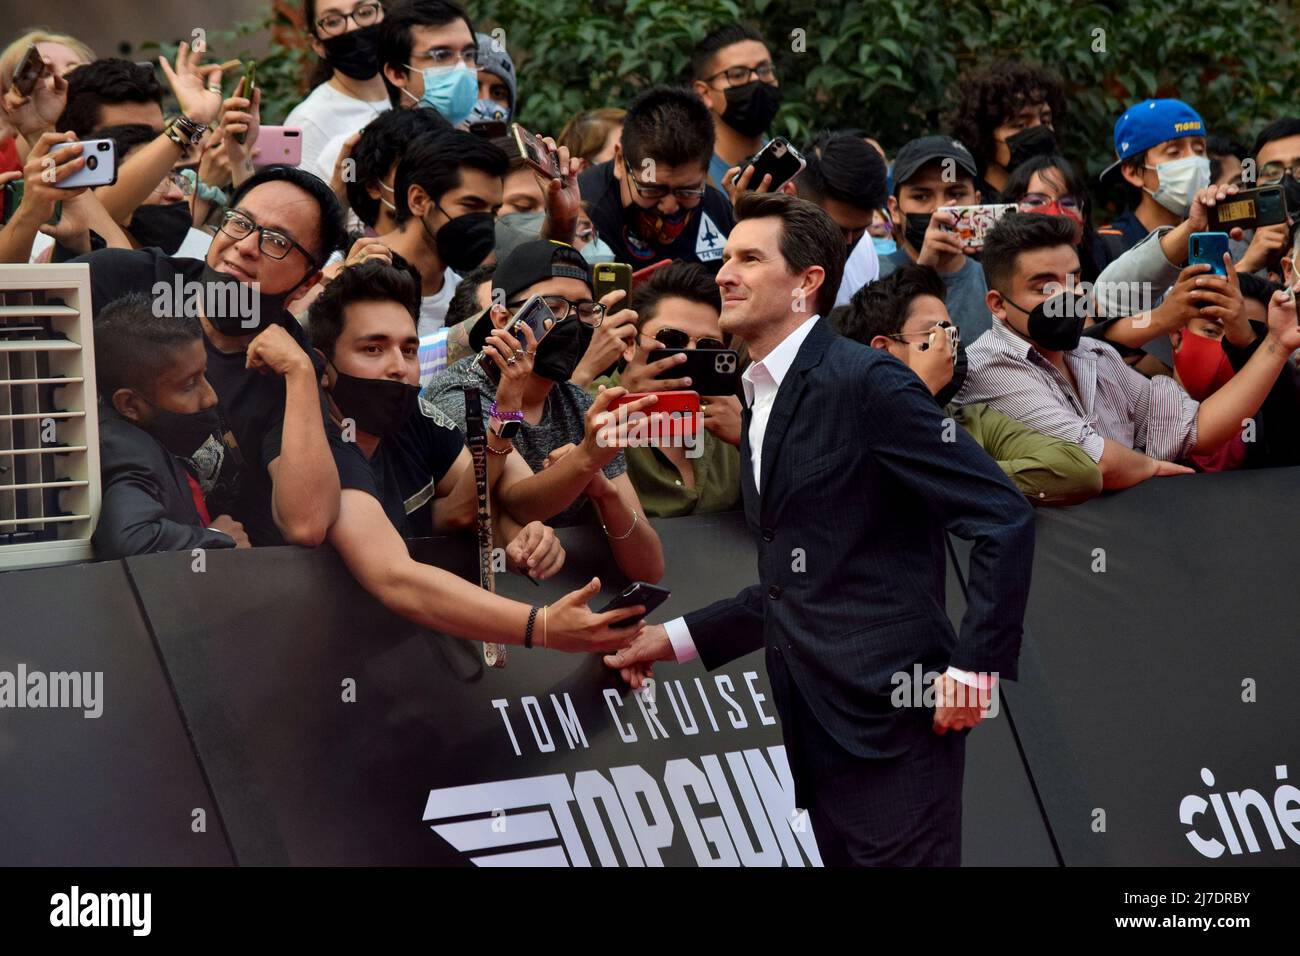 MEXICO CITY, MEXICO - MAY 06: Tom Cruise attends the Mexico Premiere of 'Top Gun: Maverick'. (Photo by Francisco Morales/DAMMPHOTO) Stock Photo